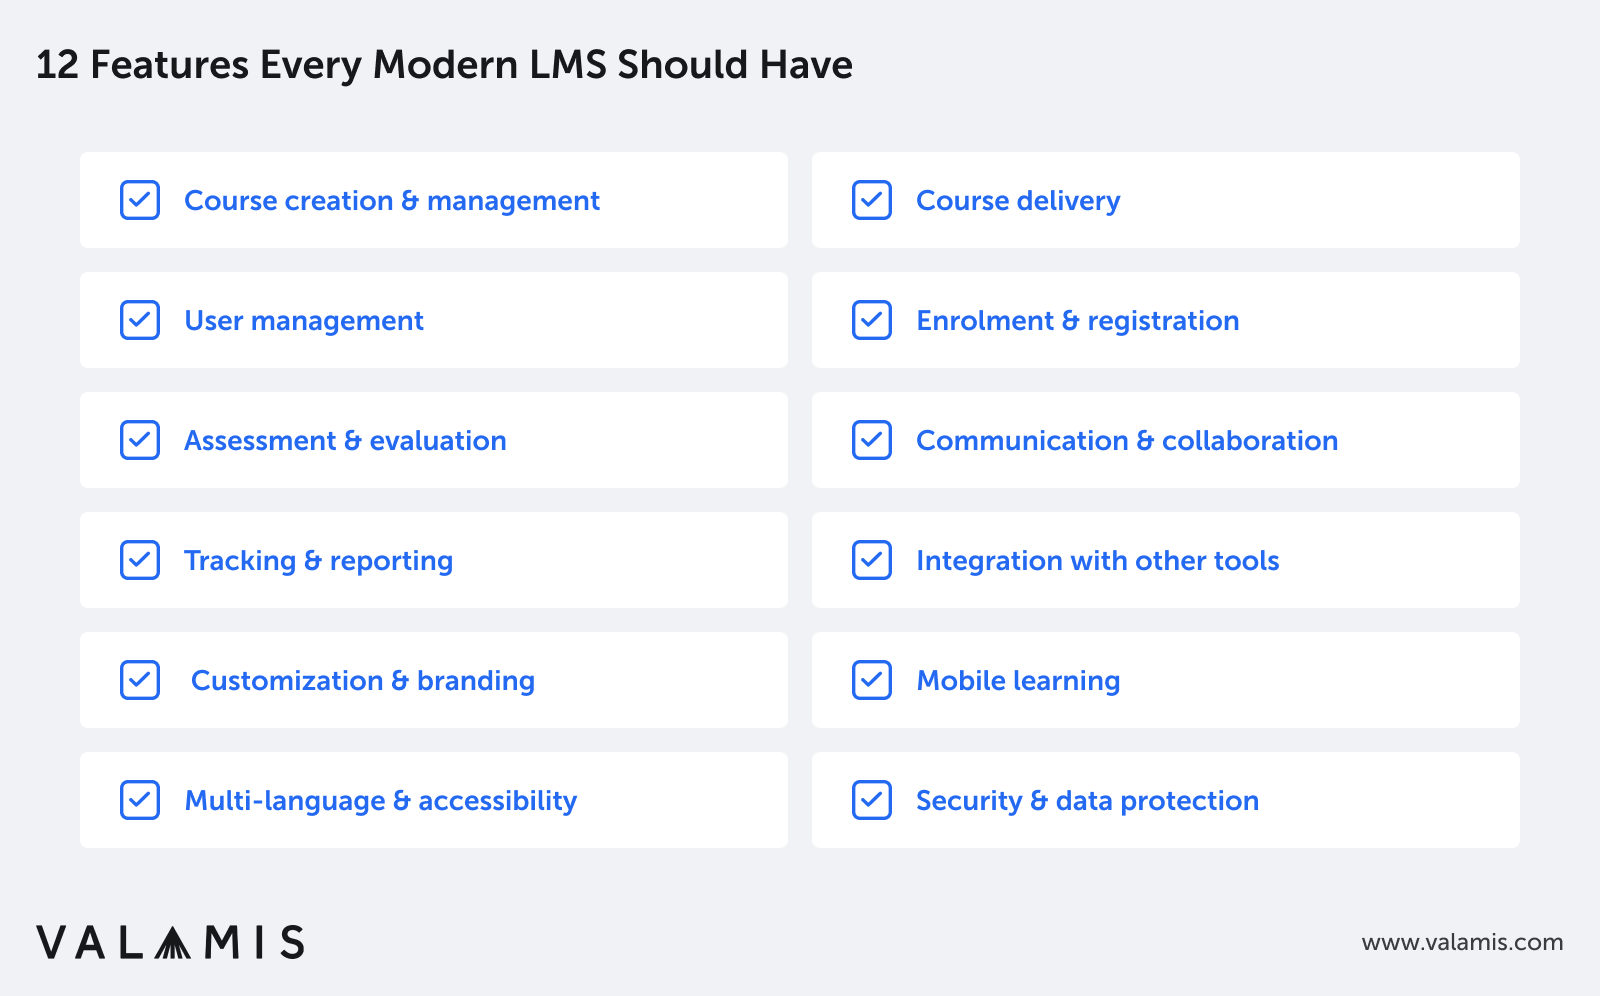 The list of LMS features